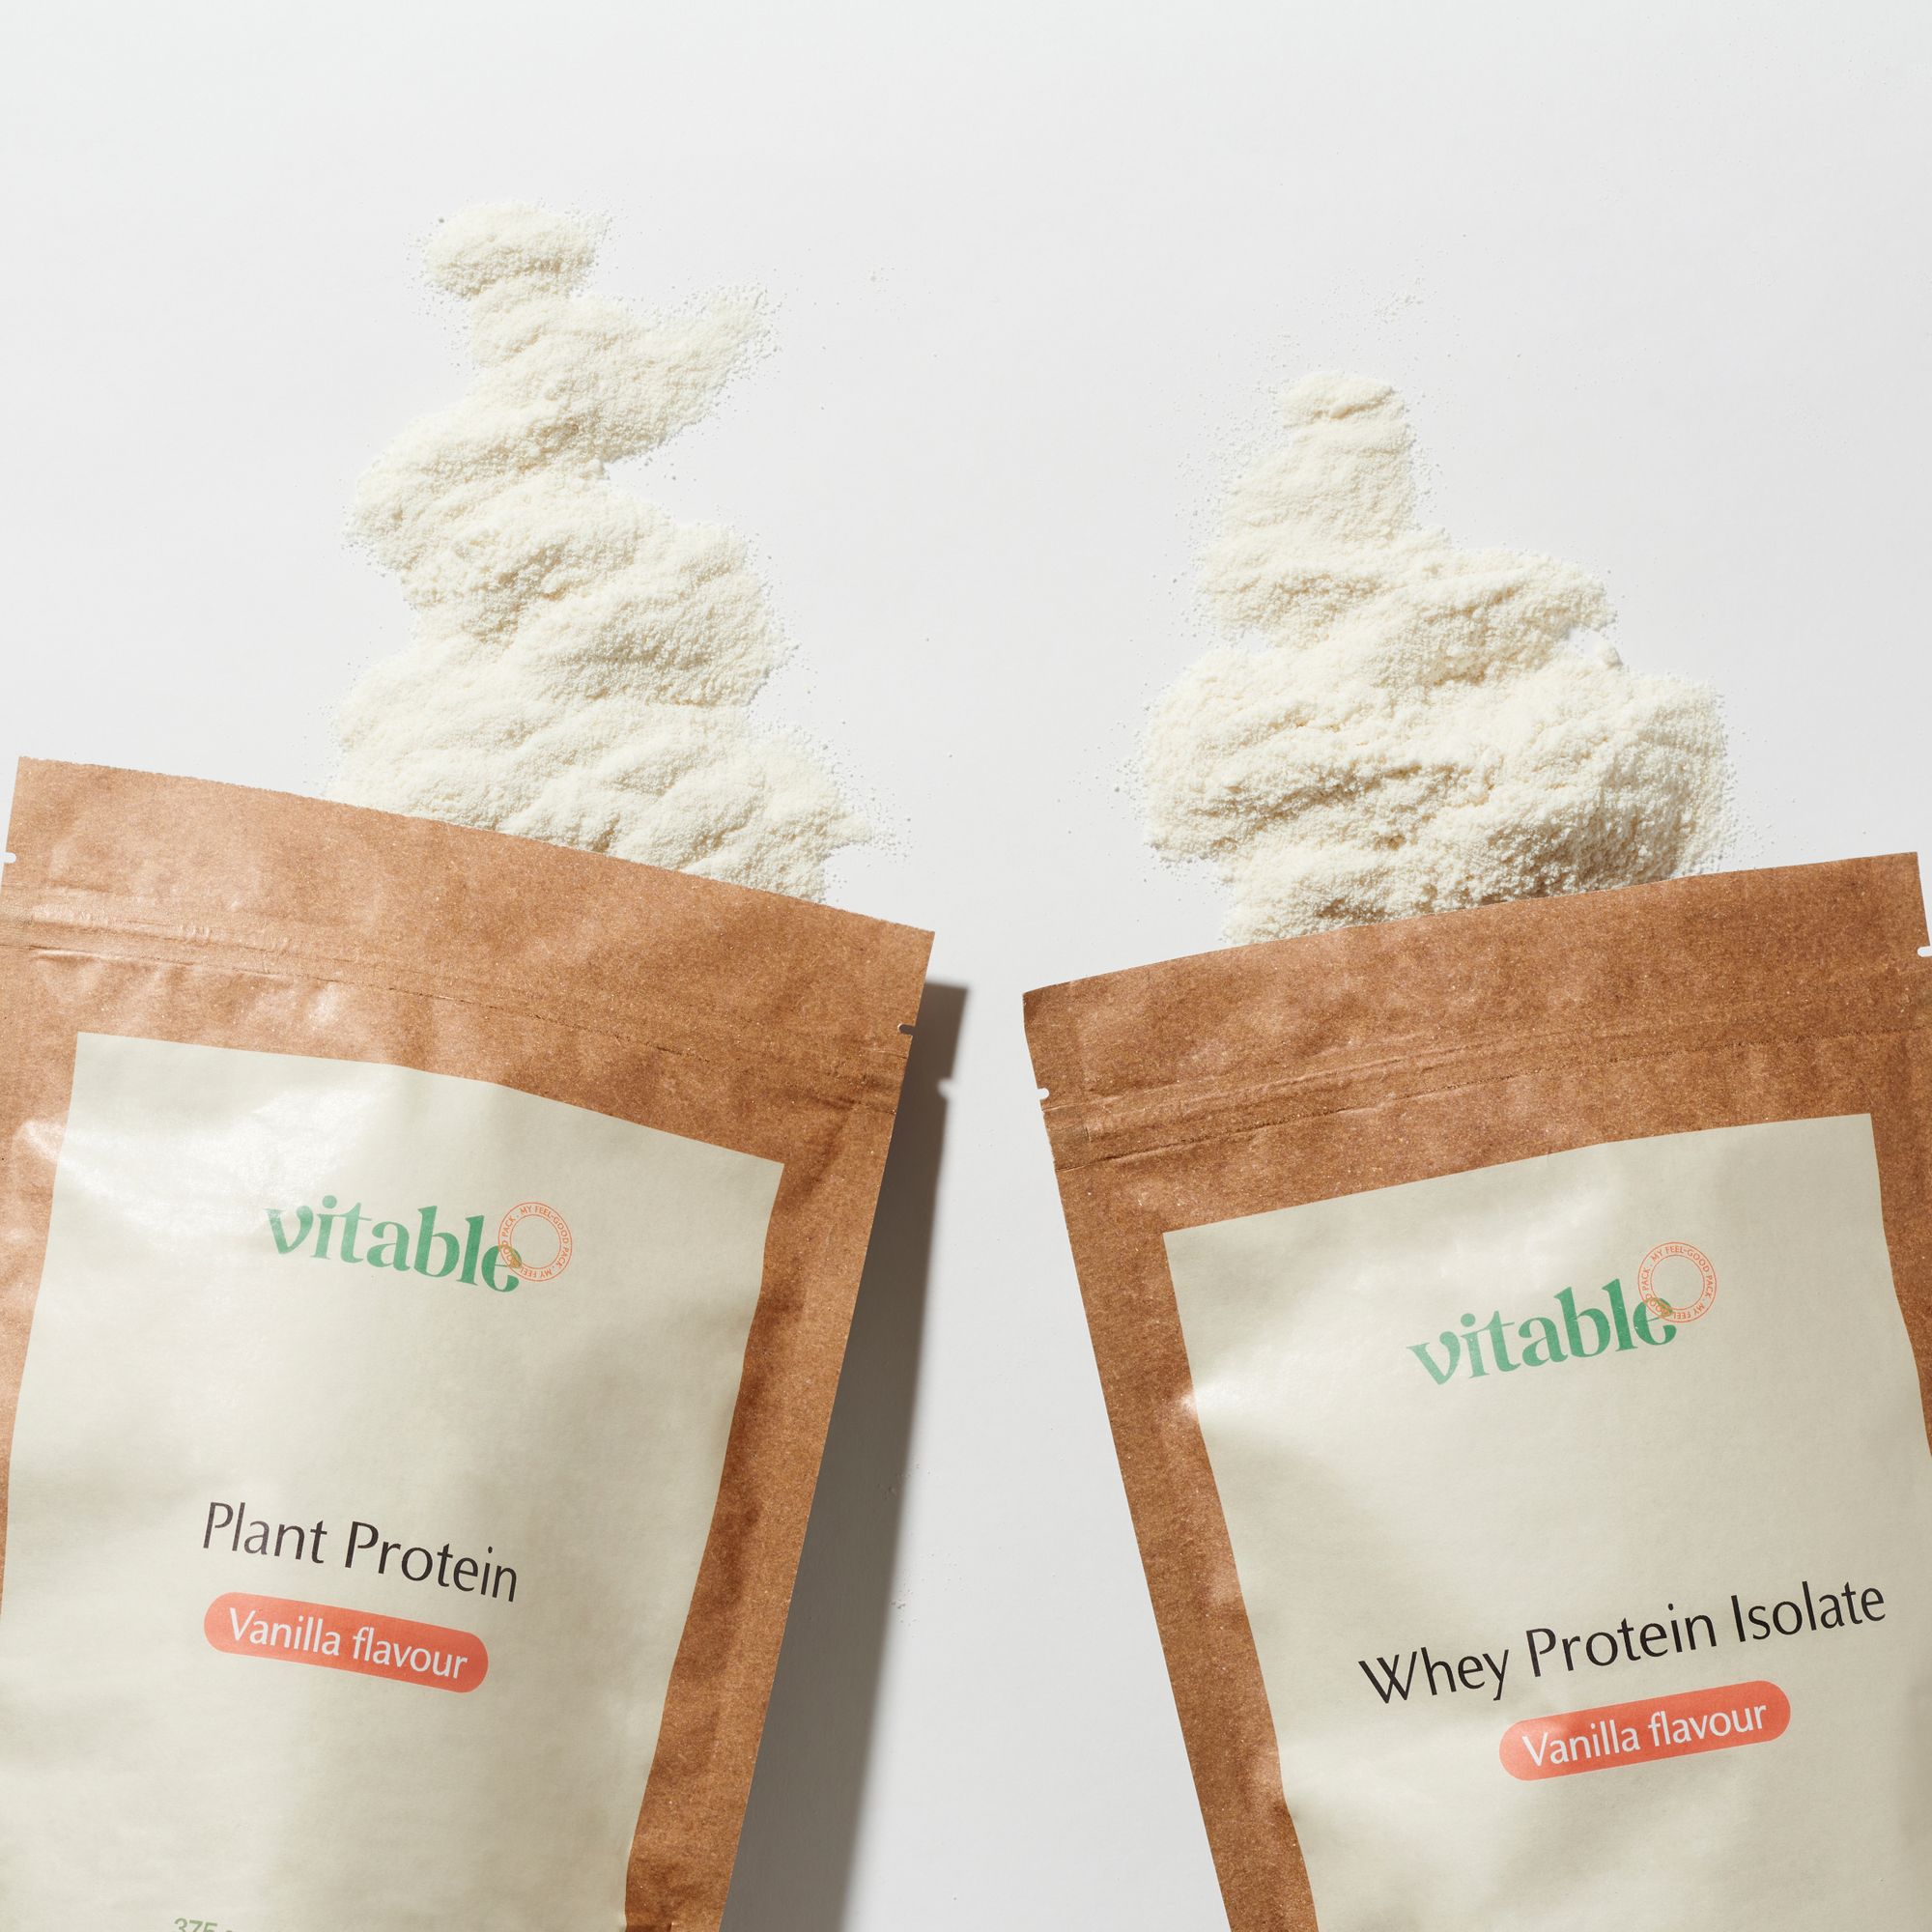 Meet our new Protein Powders 
- everything you need to know!